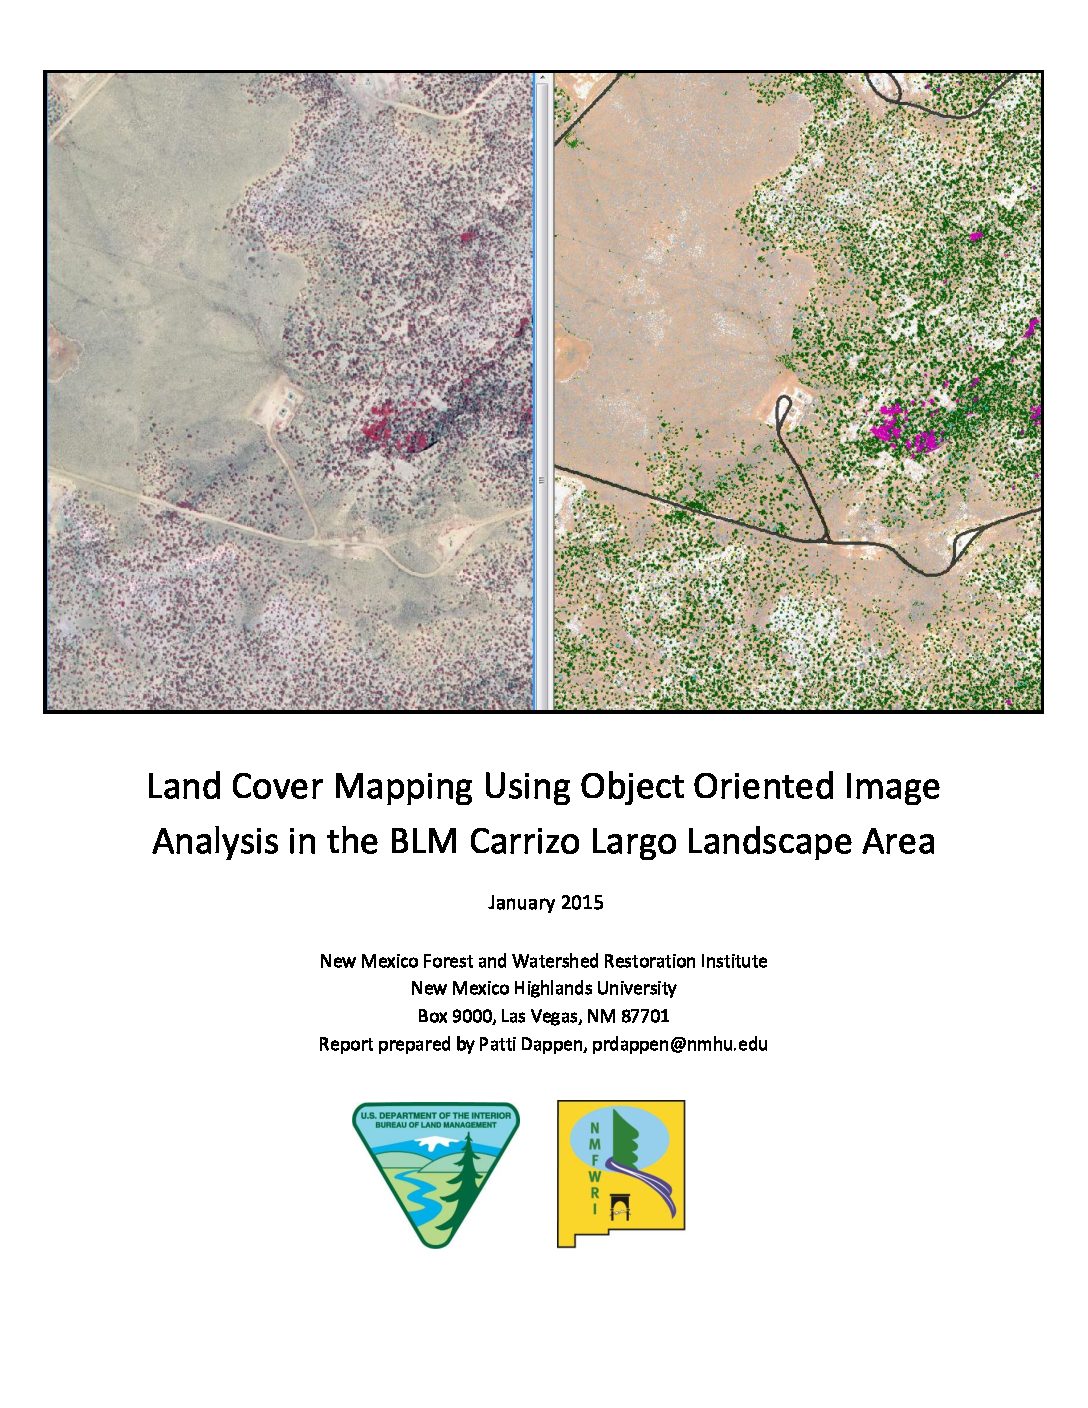 Land Cover Mapping Using Object Oriented Image Analysis in the BLM Carrizo Largo Landscape Area